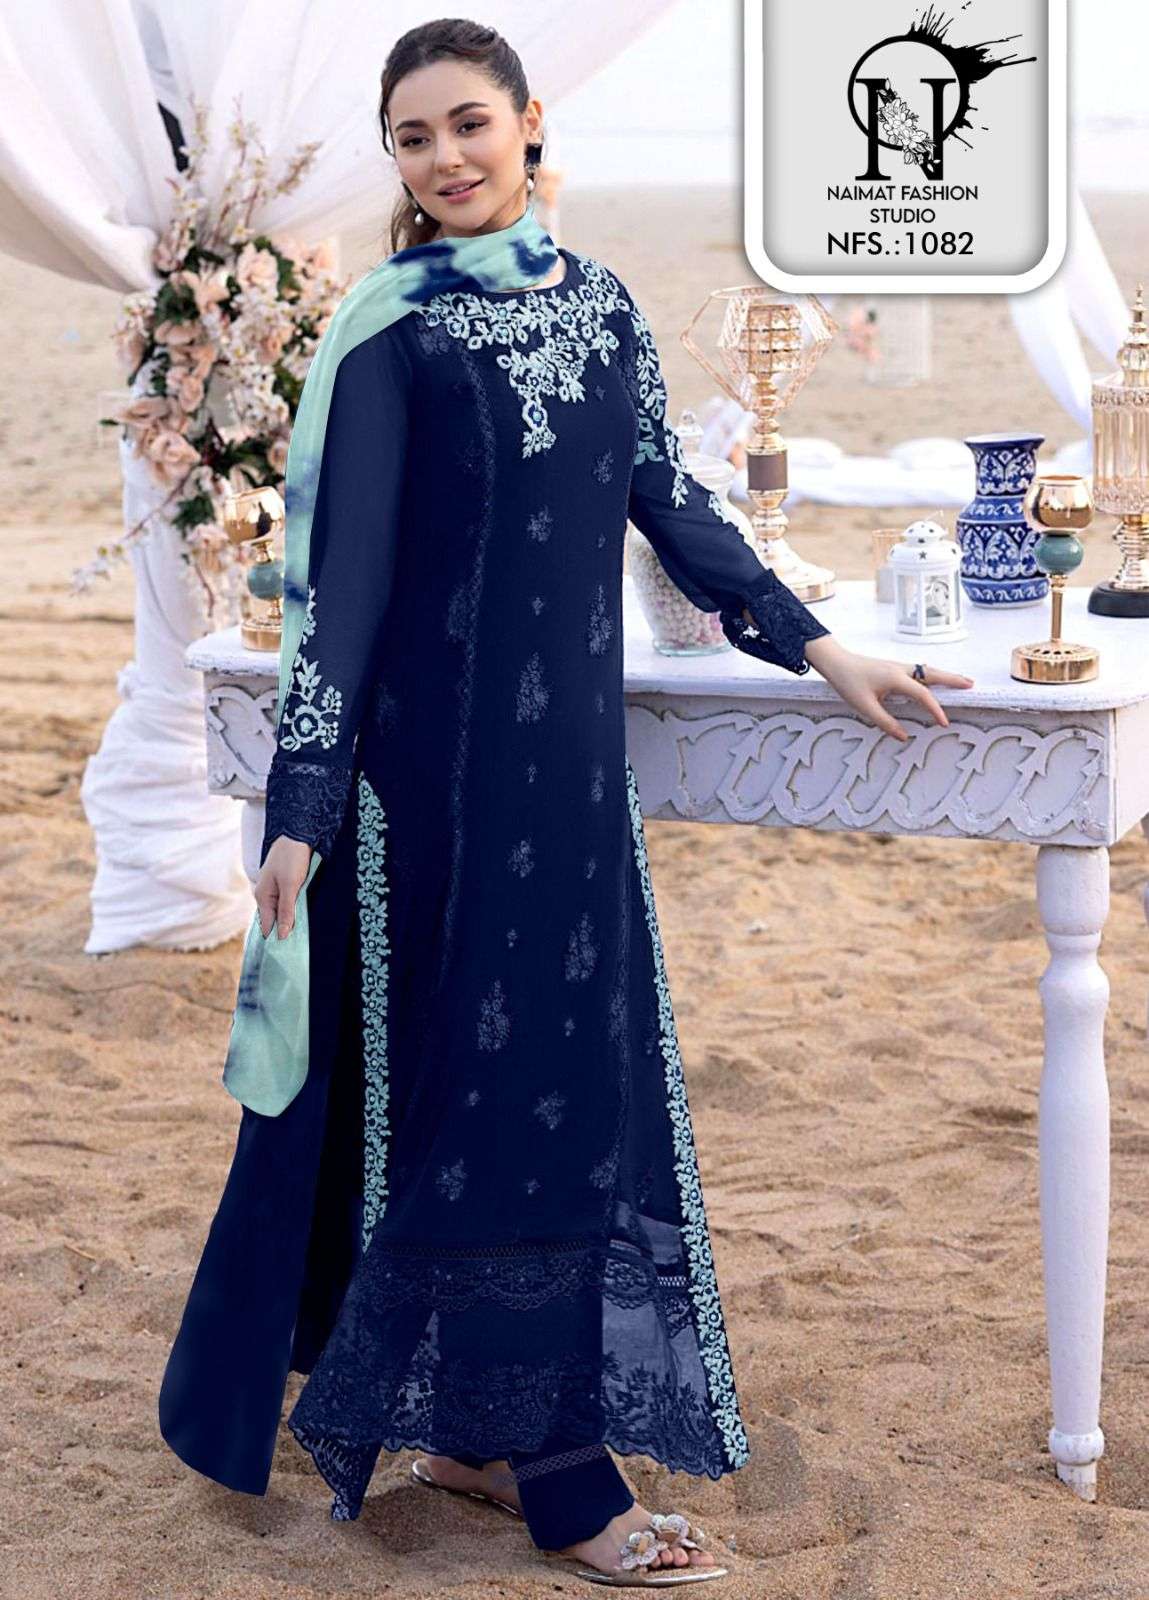 naimat fashion studio design number nfs 1082 embroidery classy collection pakistani readymade suit collection embroidery classy collection 